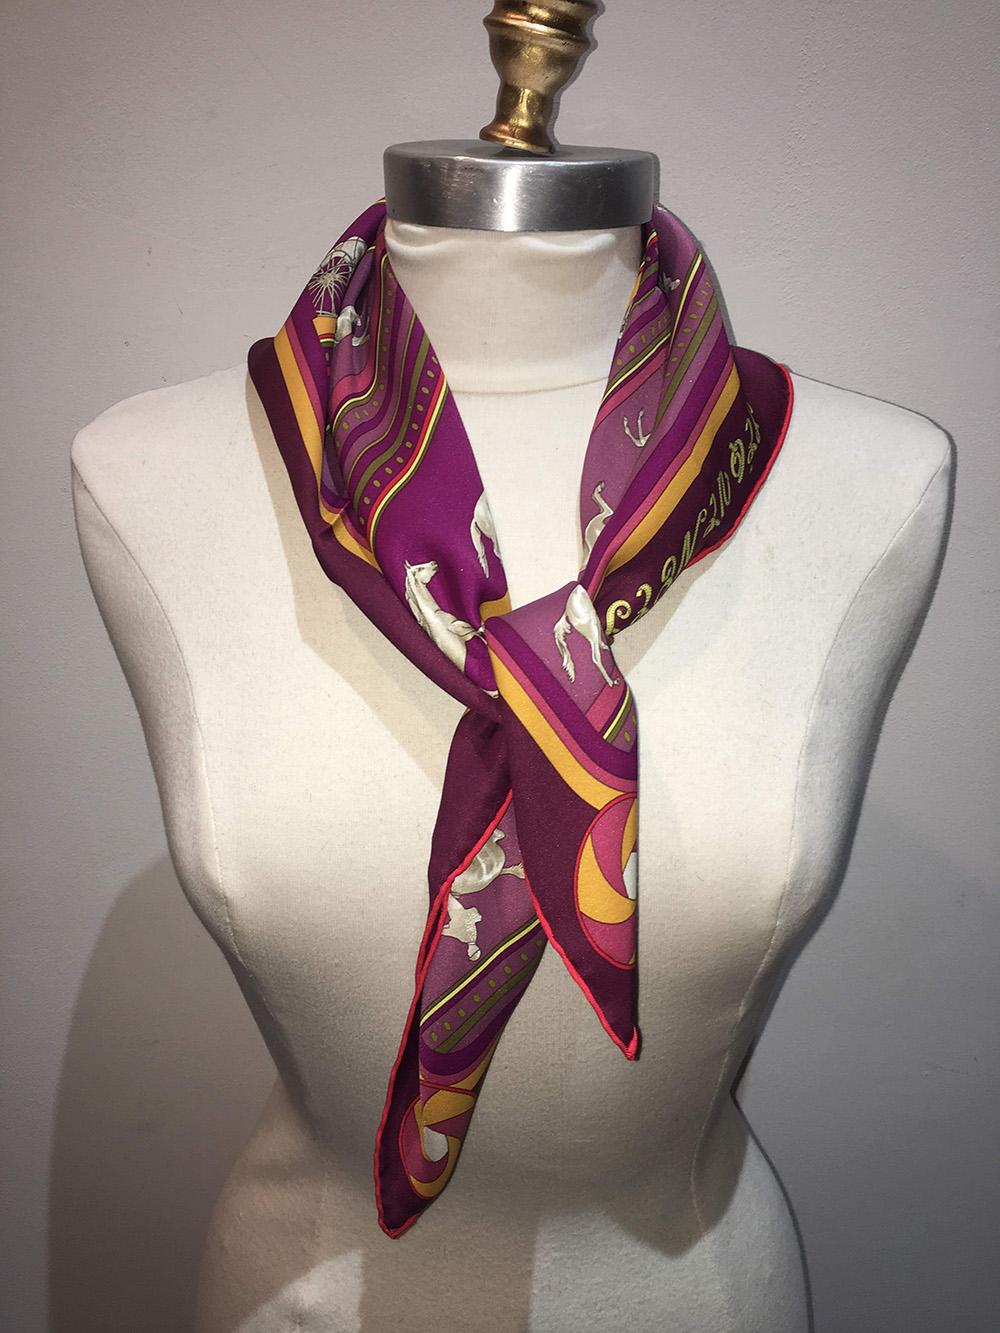 Hermes Sequences Maroon Silk Bandana Scarf 70 in excellent condition. Original silk screen design c1983 by Caty Latham features five various horse patterns over a maroon background with pink, gold, purple and fuchsia stripes. 100% silk, hand rolled